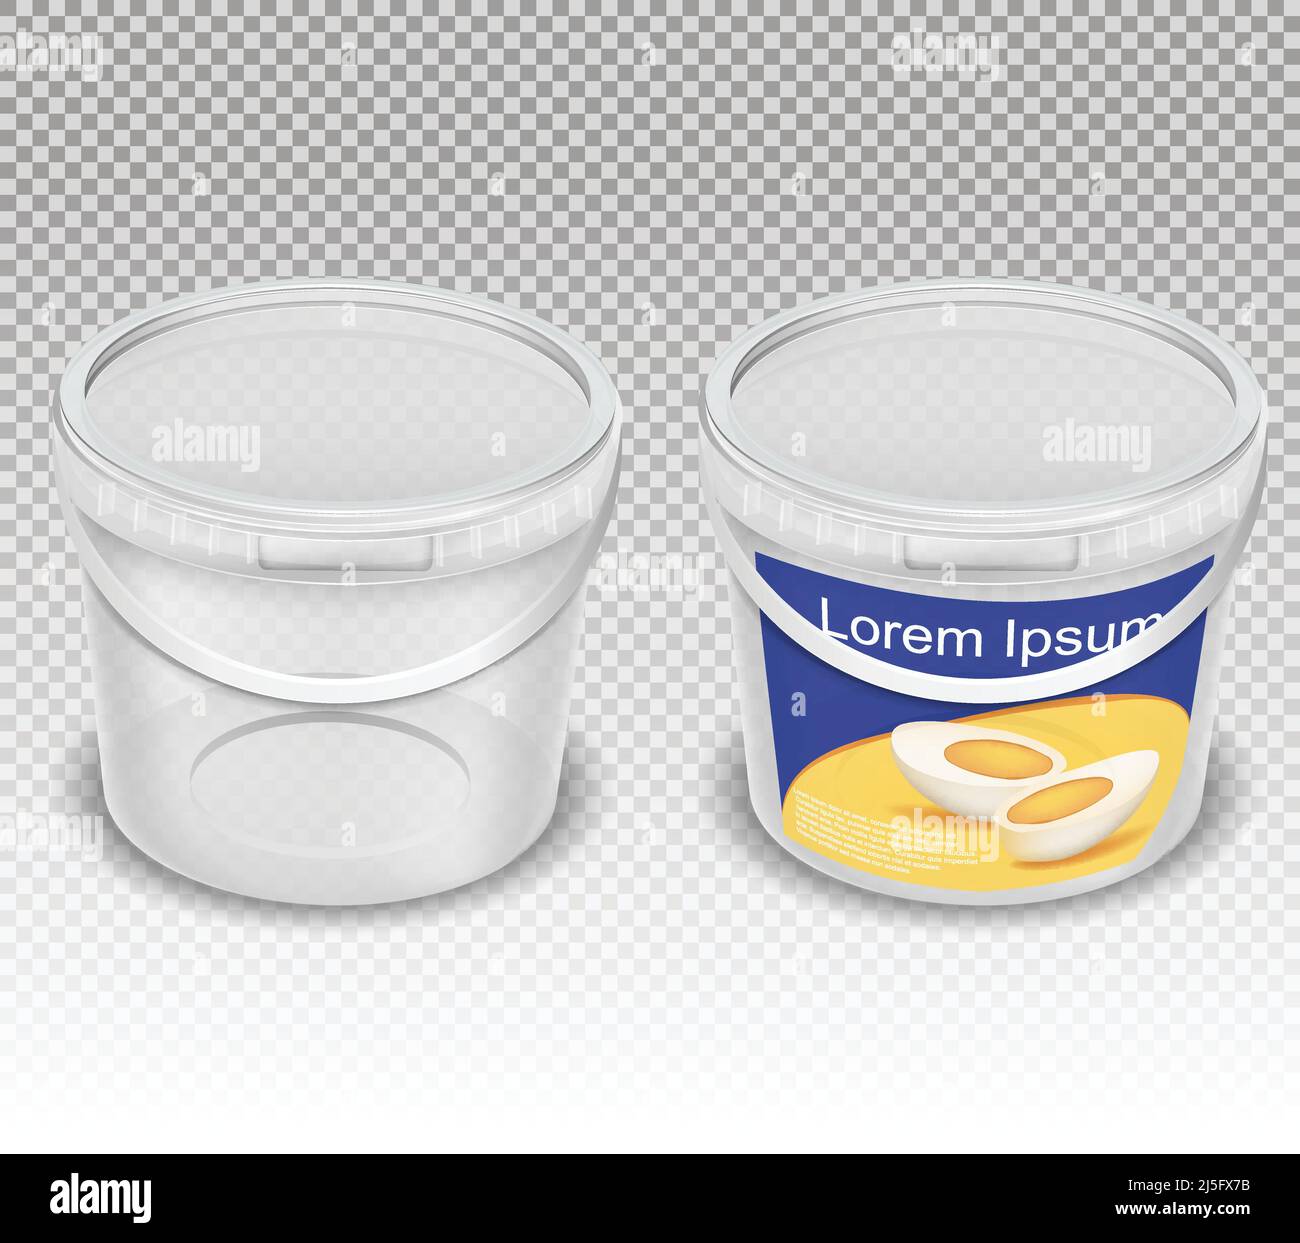 Vector realistic illustration of empty plastic transparent buckets for food - mayonnaise, sour cream, yogurt, cottage cheese, sauce, ice cream. Set of Stock Vector